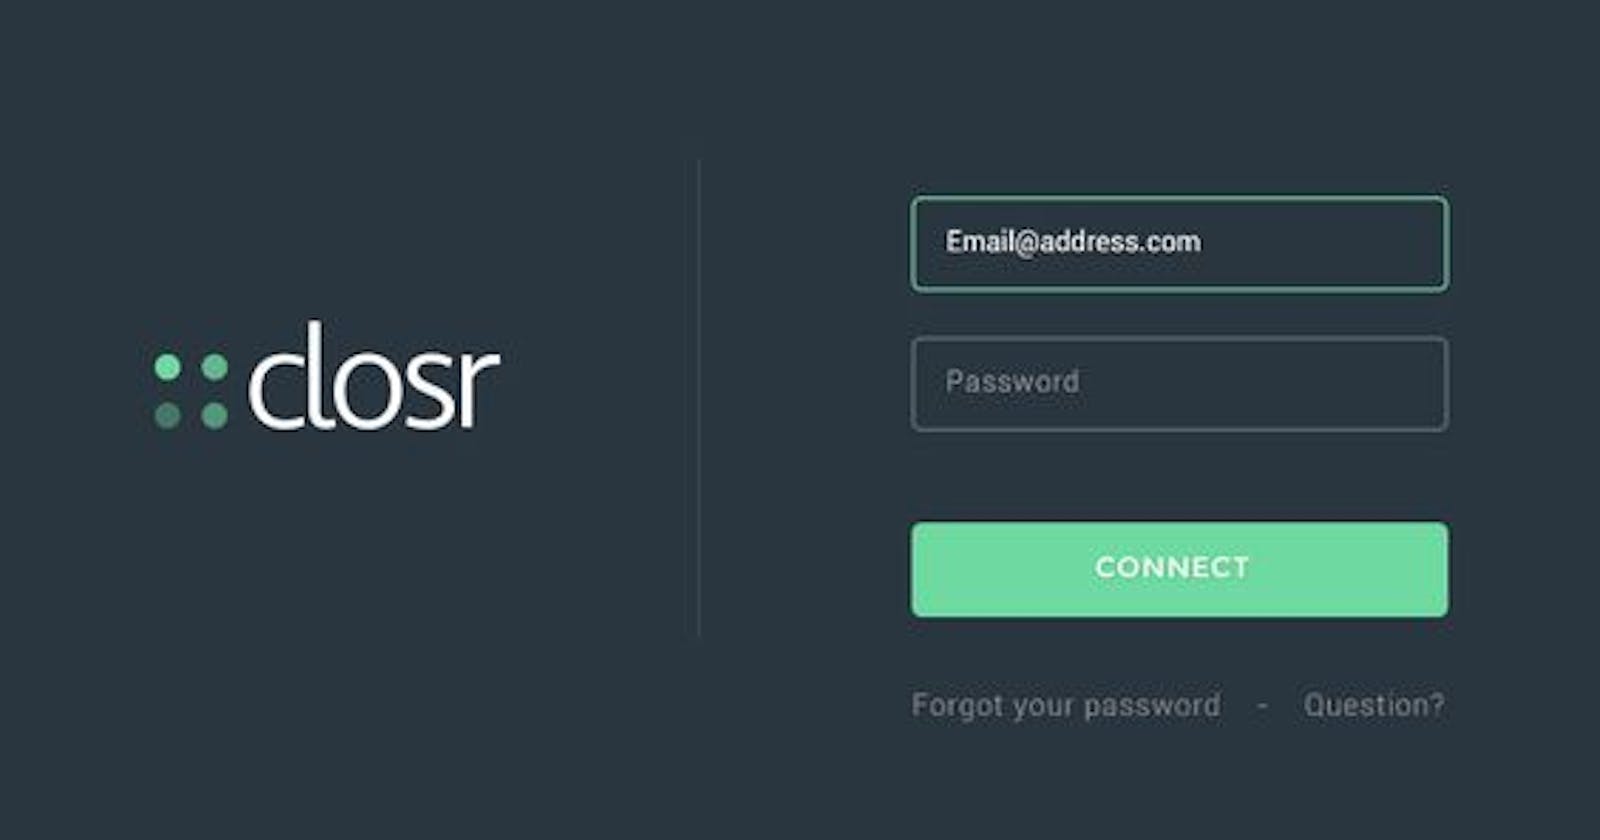 Building a Responsive Login Page with React: A Step-by-Step Guide